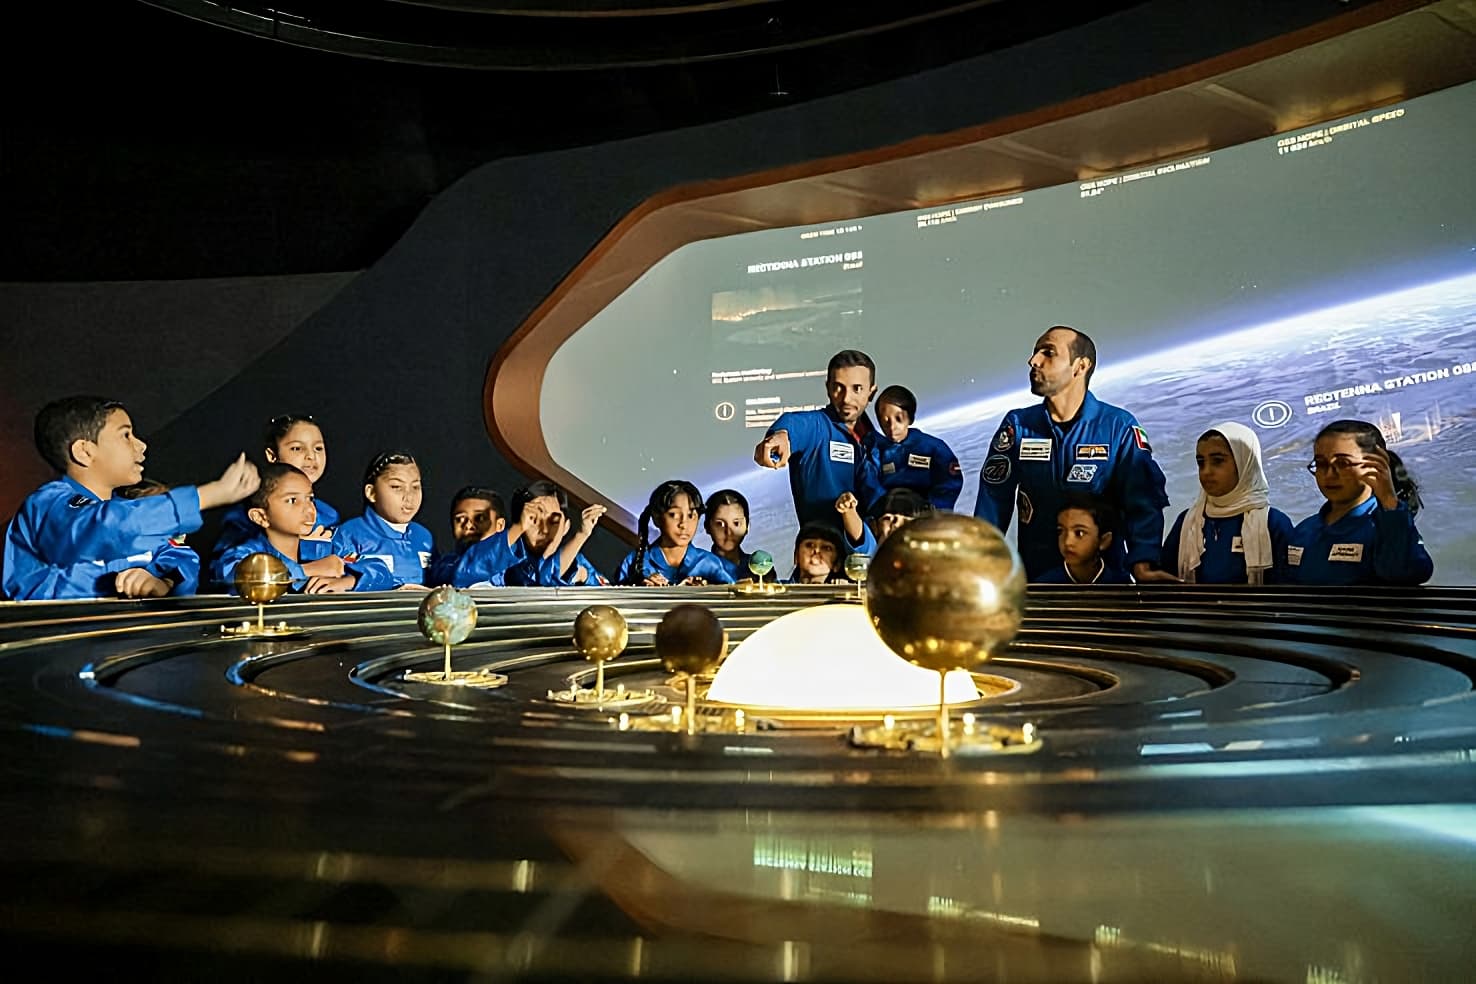 UAE Astronauts Inspire Young Spacewalkers at Dubai's Museum of the Future